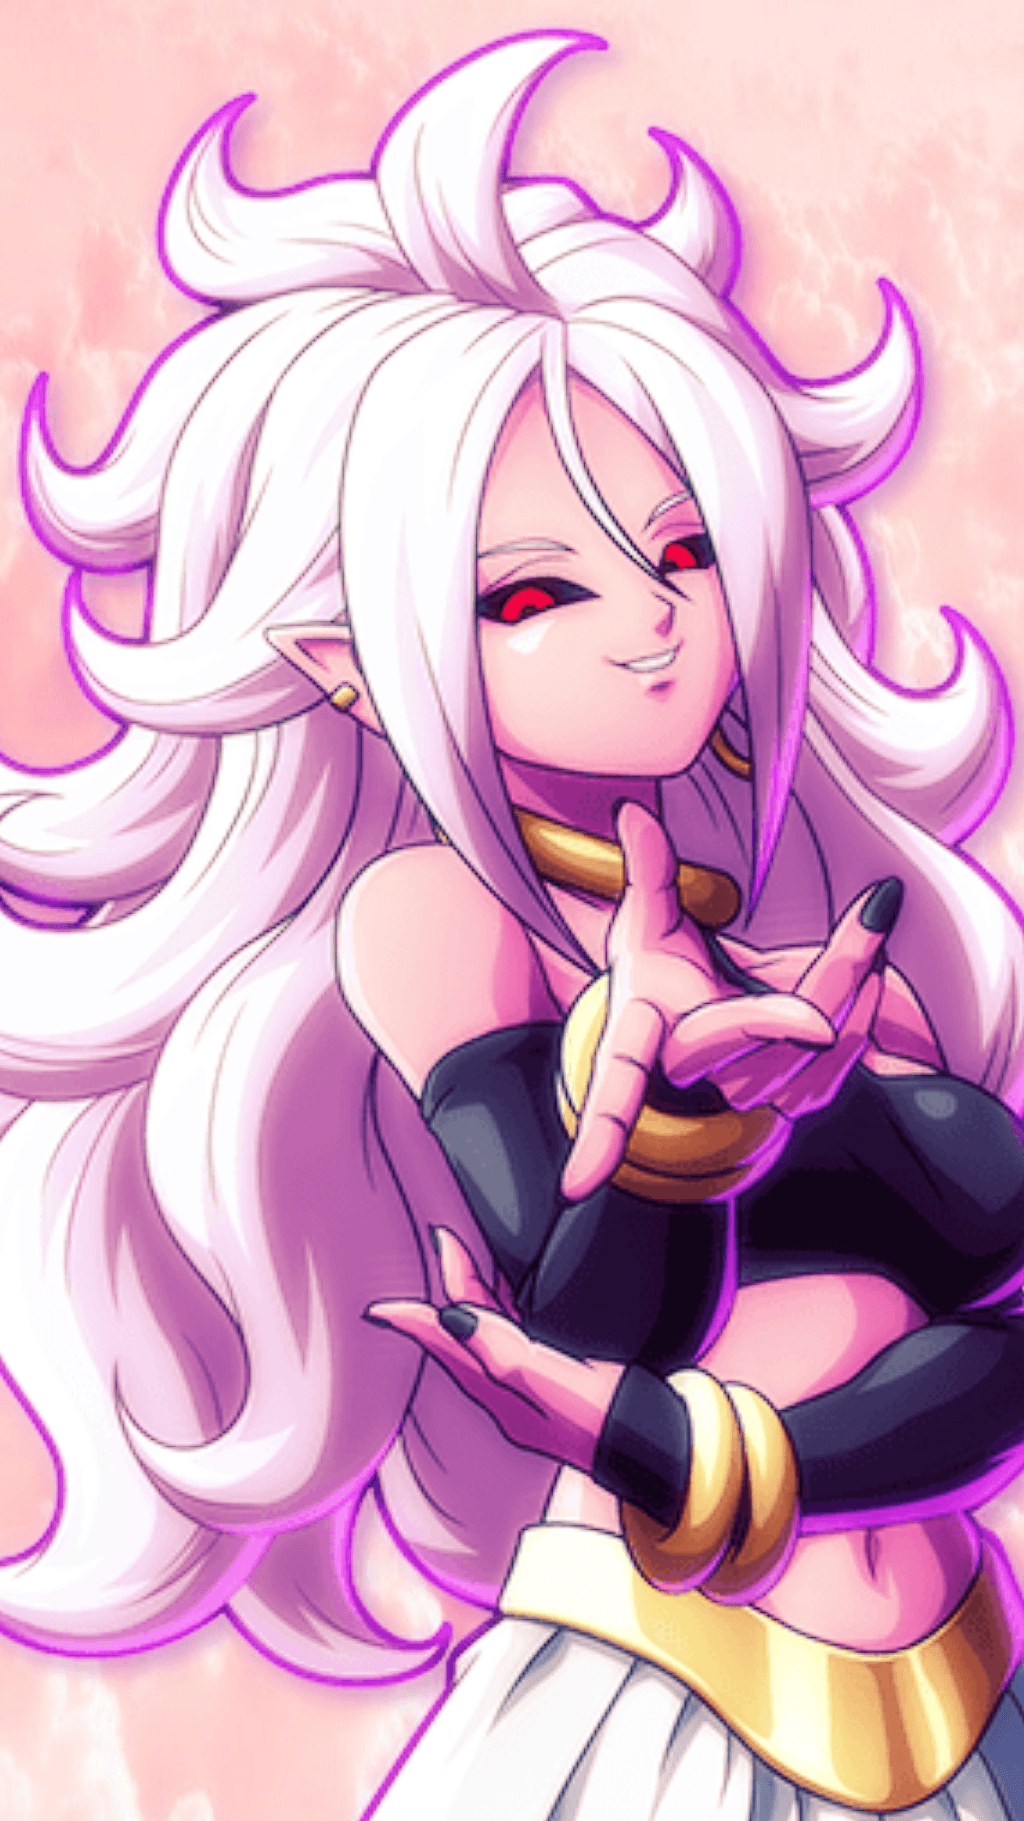 Fan Made Android 21 Wallpaper (9:16)